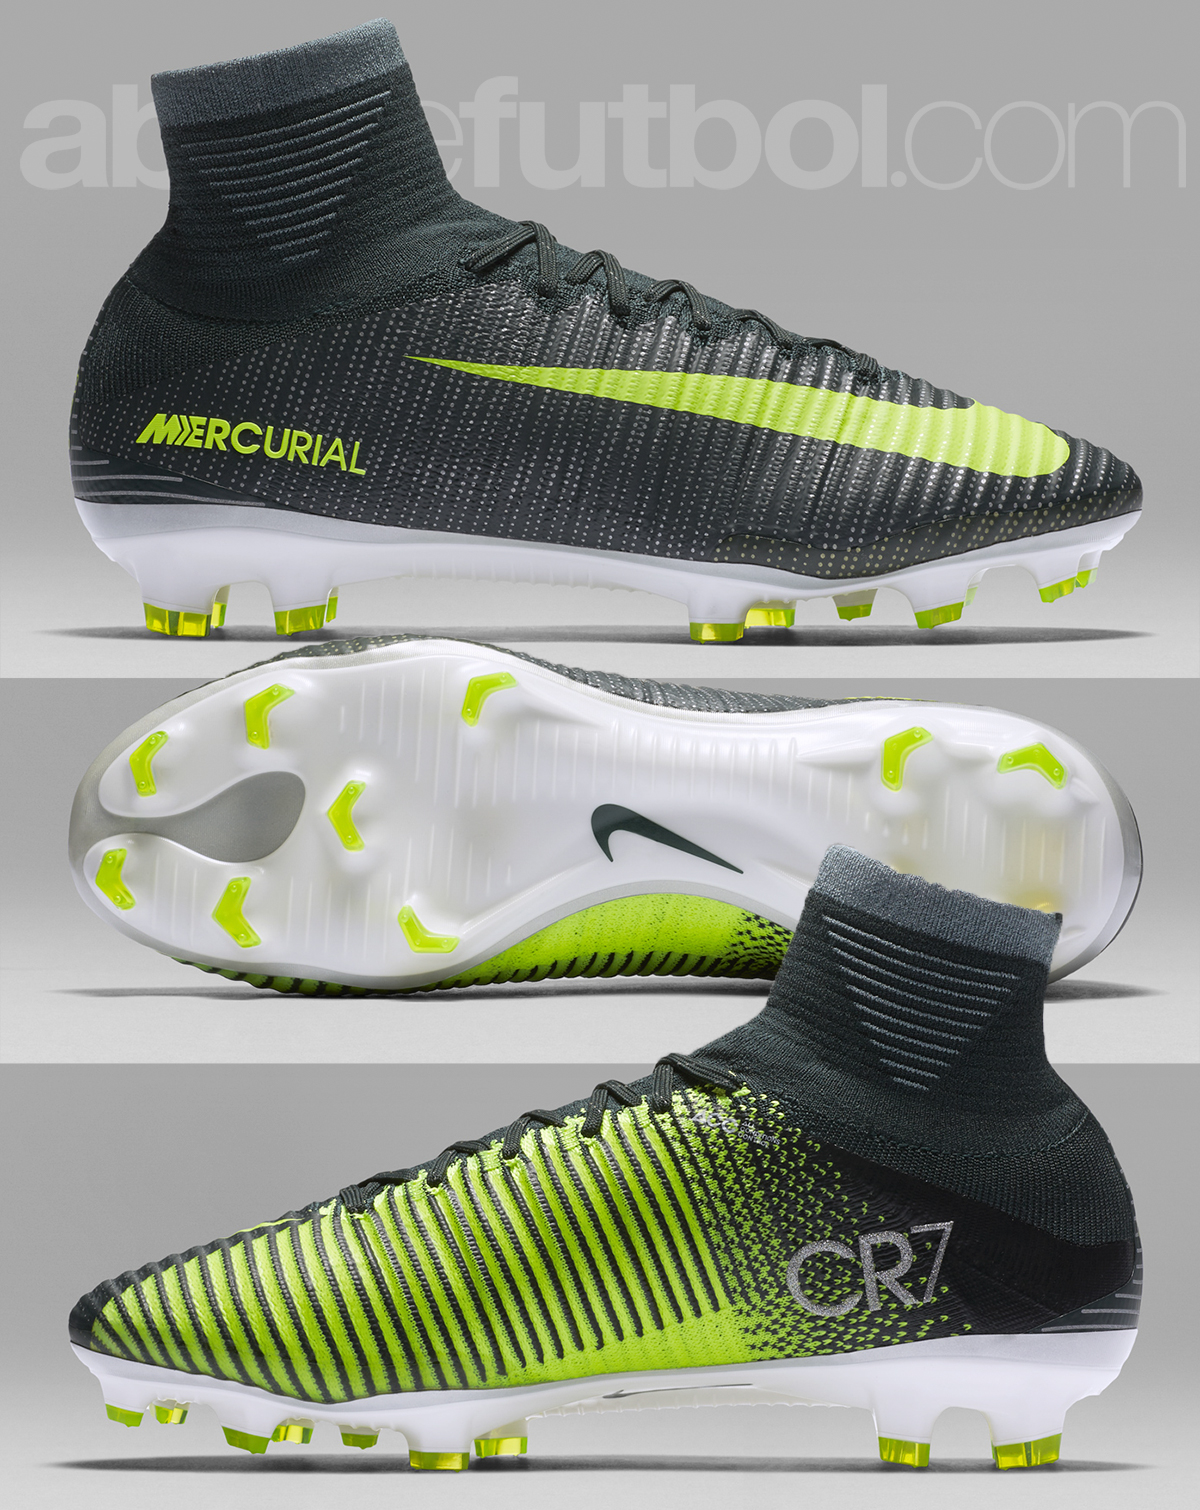 Nike Mercurial 3: Discovery | abcdefutbol